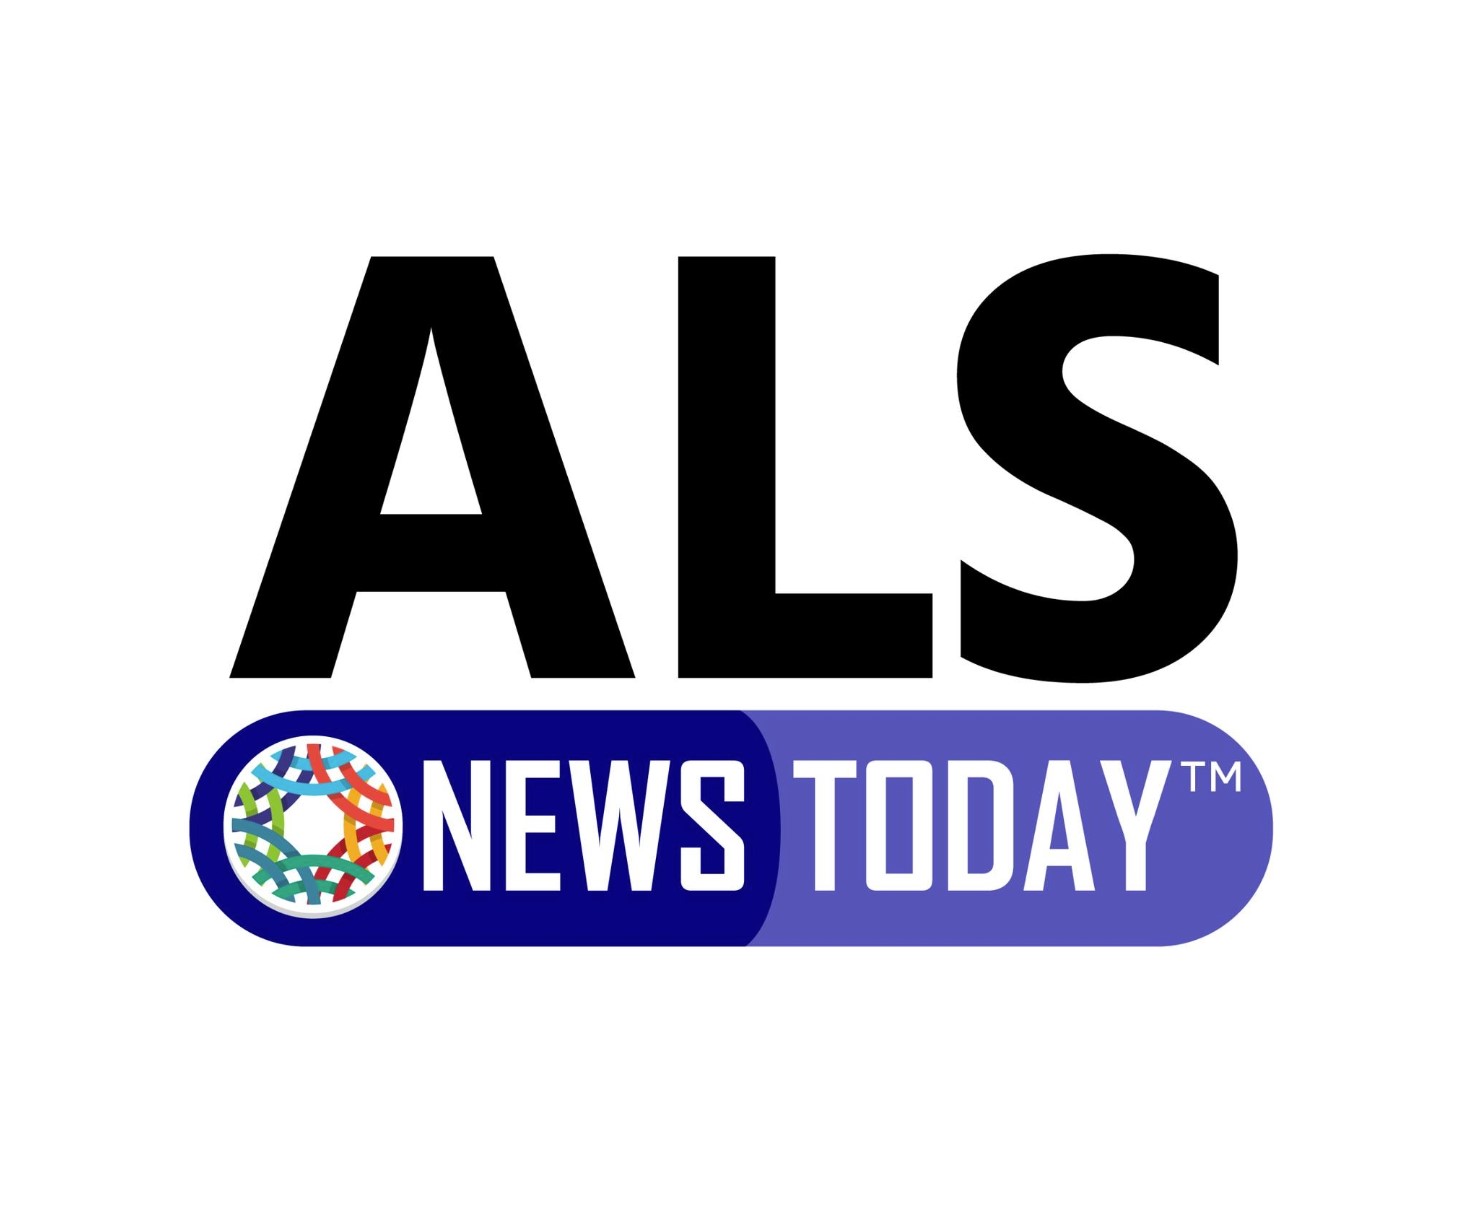 ALS NEWS TODAY: PrimeC Trial Findings to Aid in Identifying Facial Biomarkers of ALS